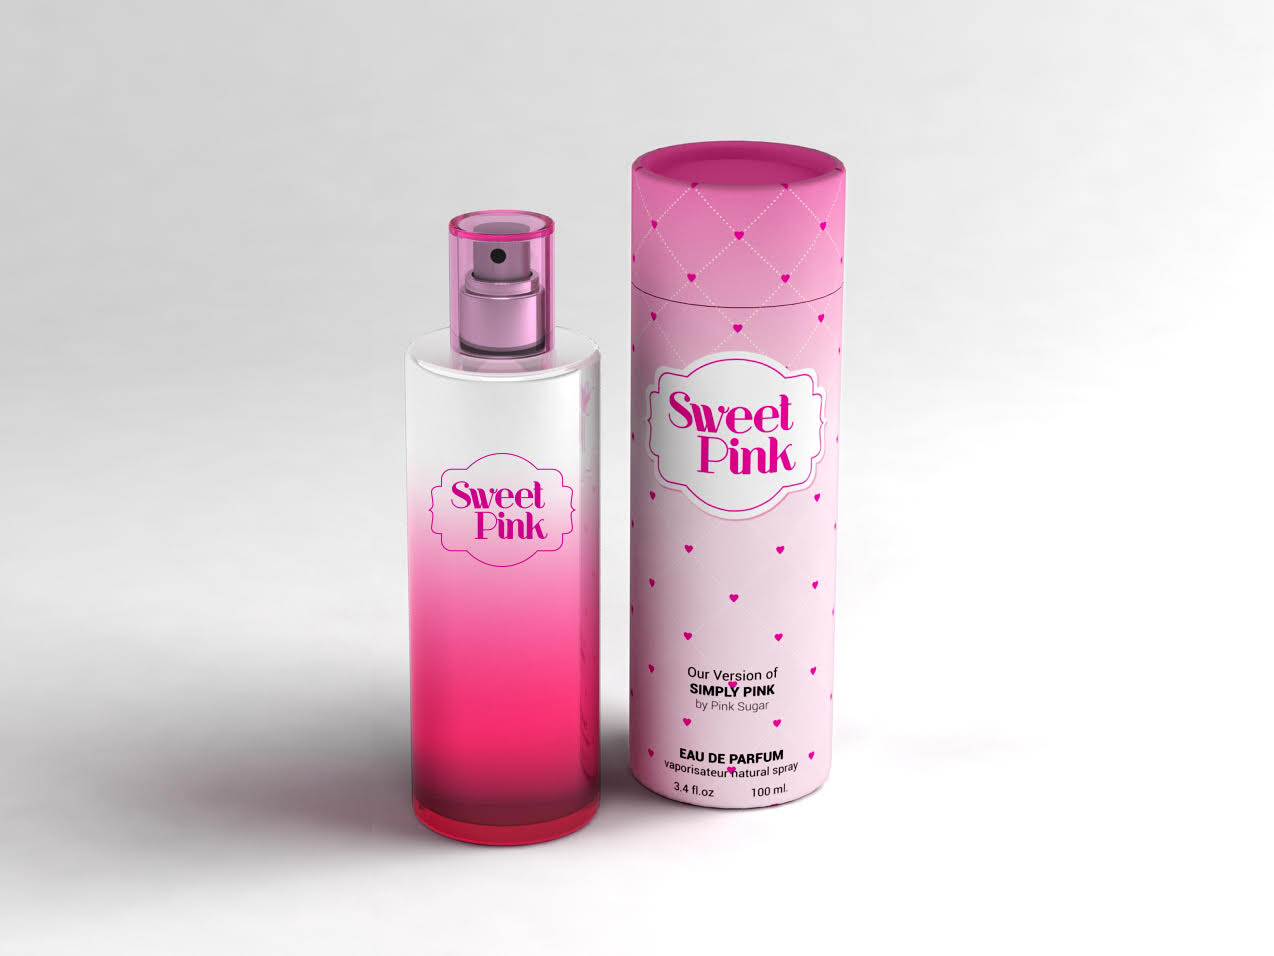 Sweet Pink Inspired by Simply Pink by Pink Sugar - Women